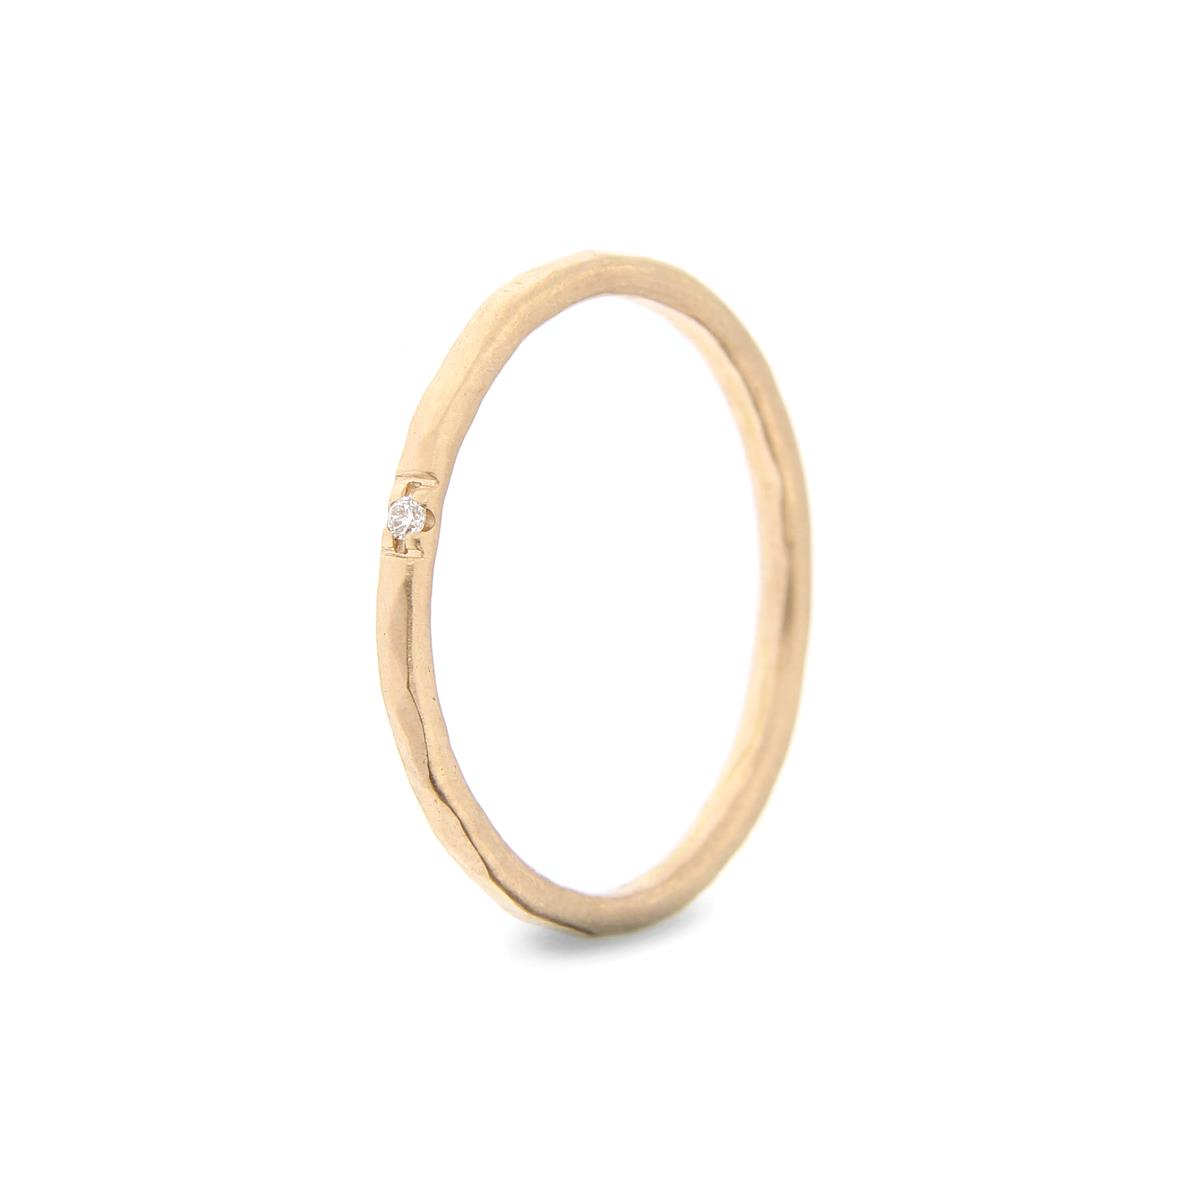 Katie g. Jewellery - Hammered Ring 1,5mm - Rosé Gold 2 + 1 Diamond